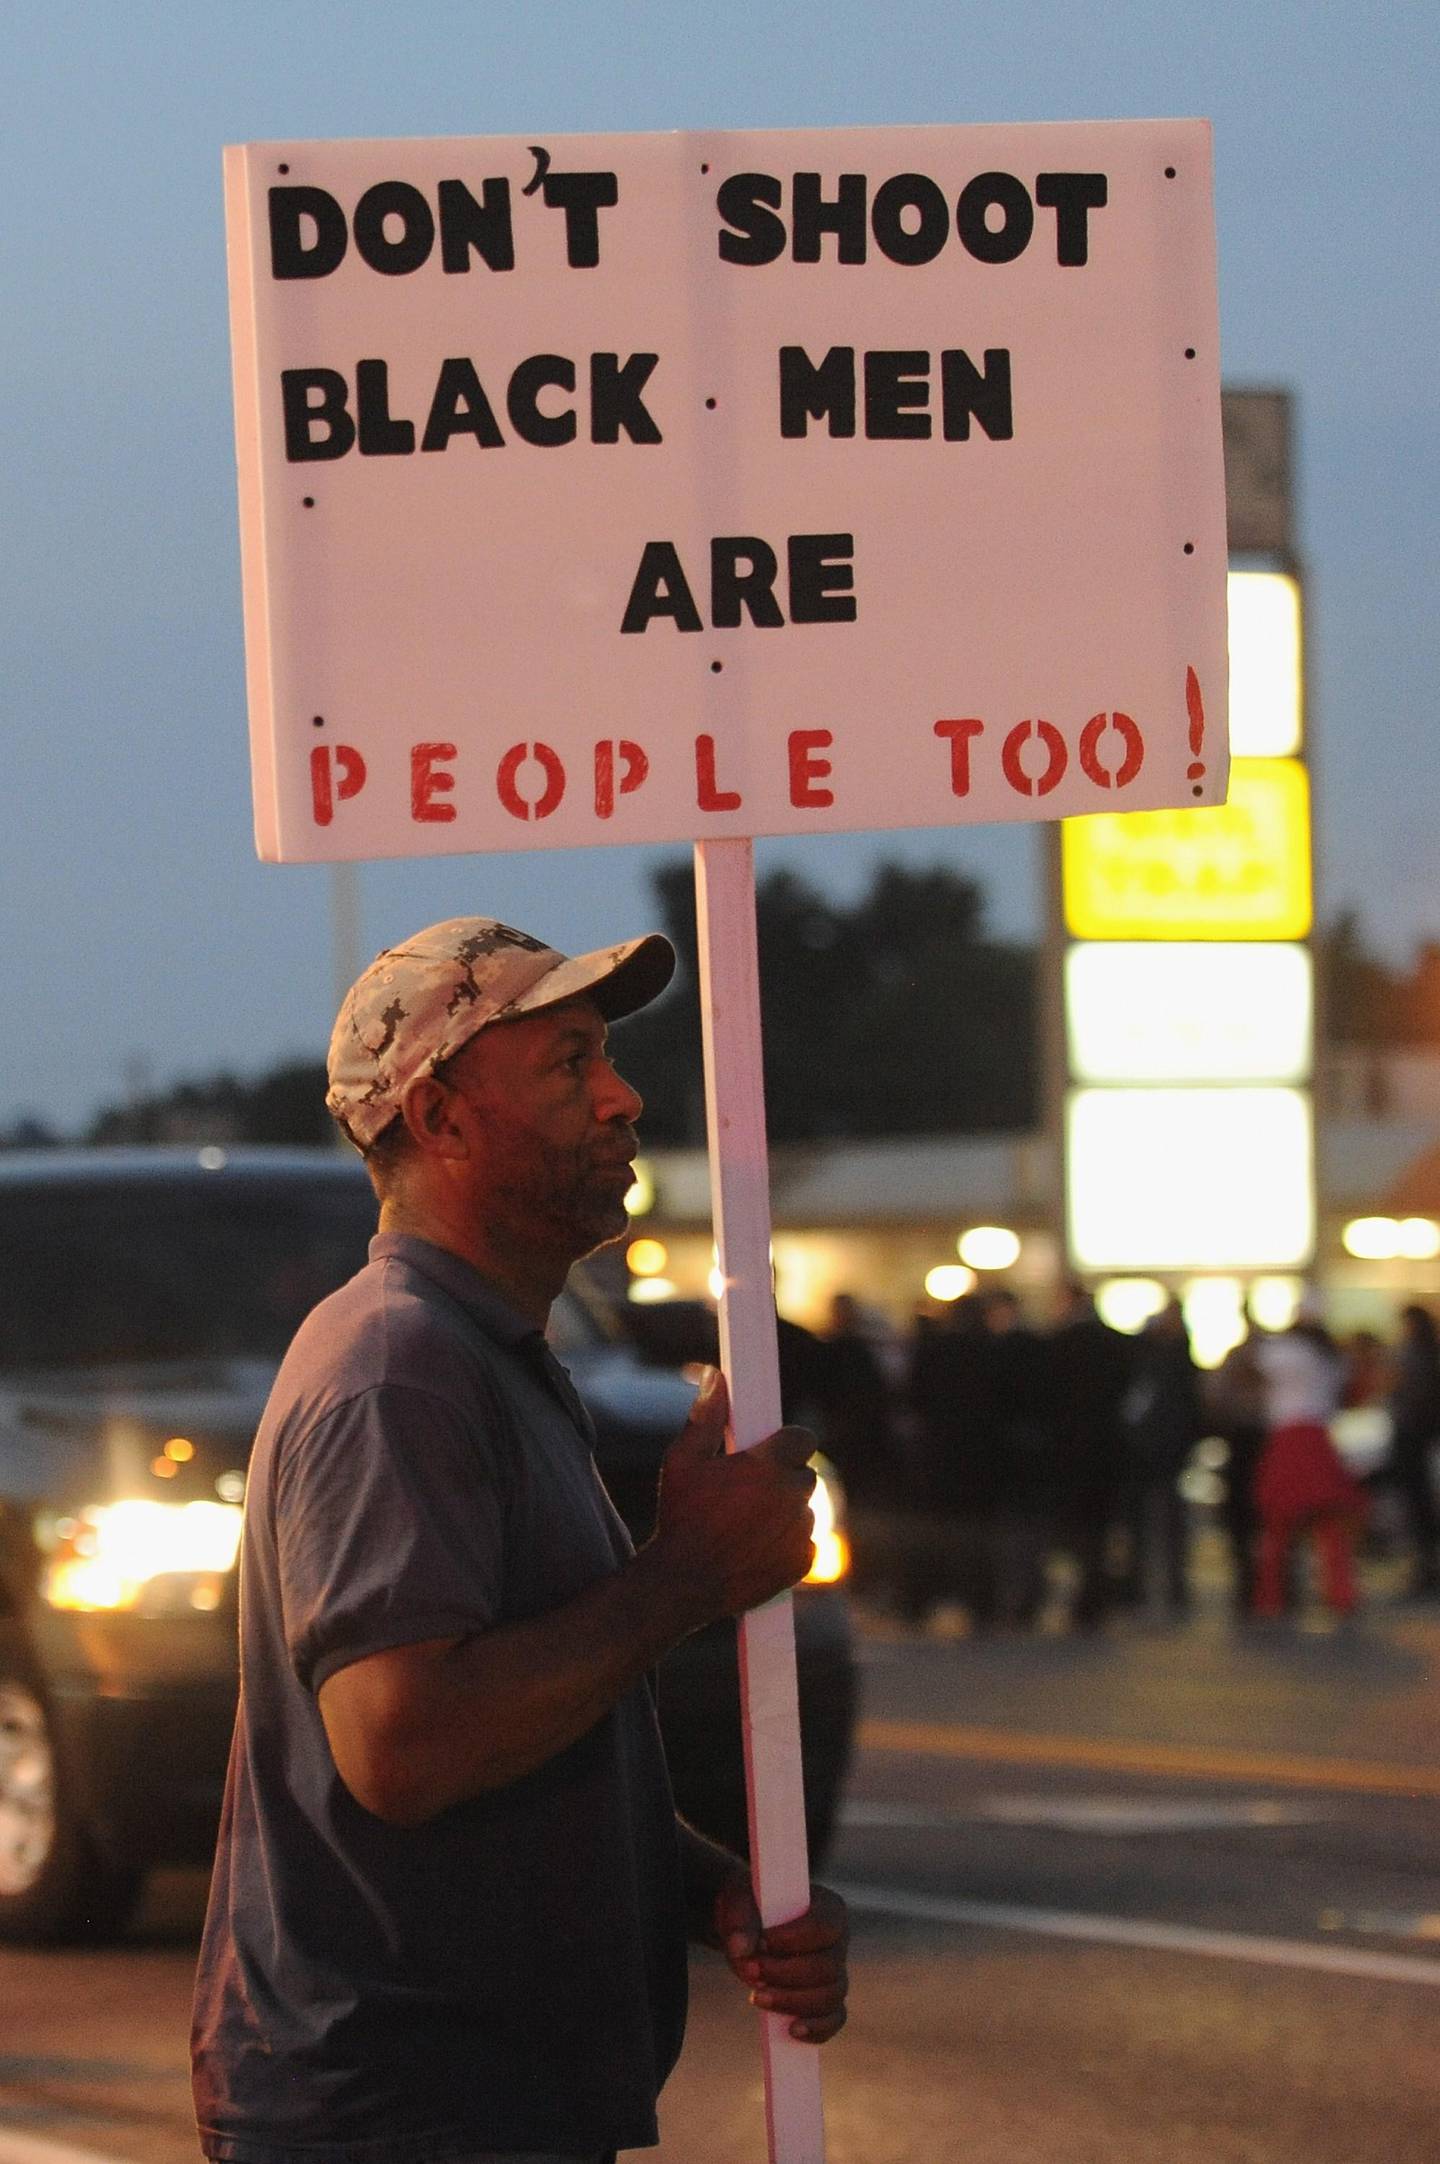 A protestor holds a sign during a protest in Ferguson, Missouri on August 18, 2014. Police fired tear gas in another night of unrest in a Missouri town where a white police officer shot and killed an unarmed black teenager, just hours after President Barack Obama called for calm. AFP PHOTO / Michael B. Thomas